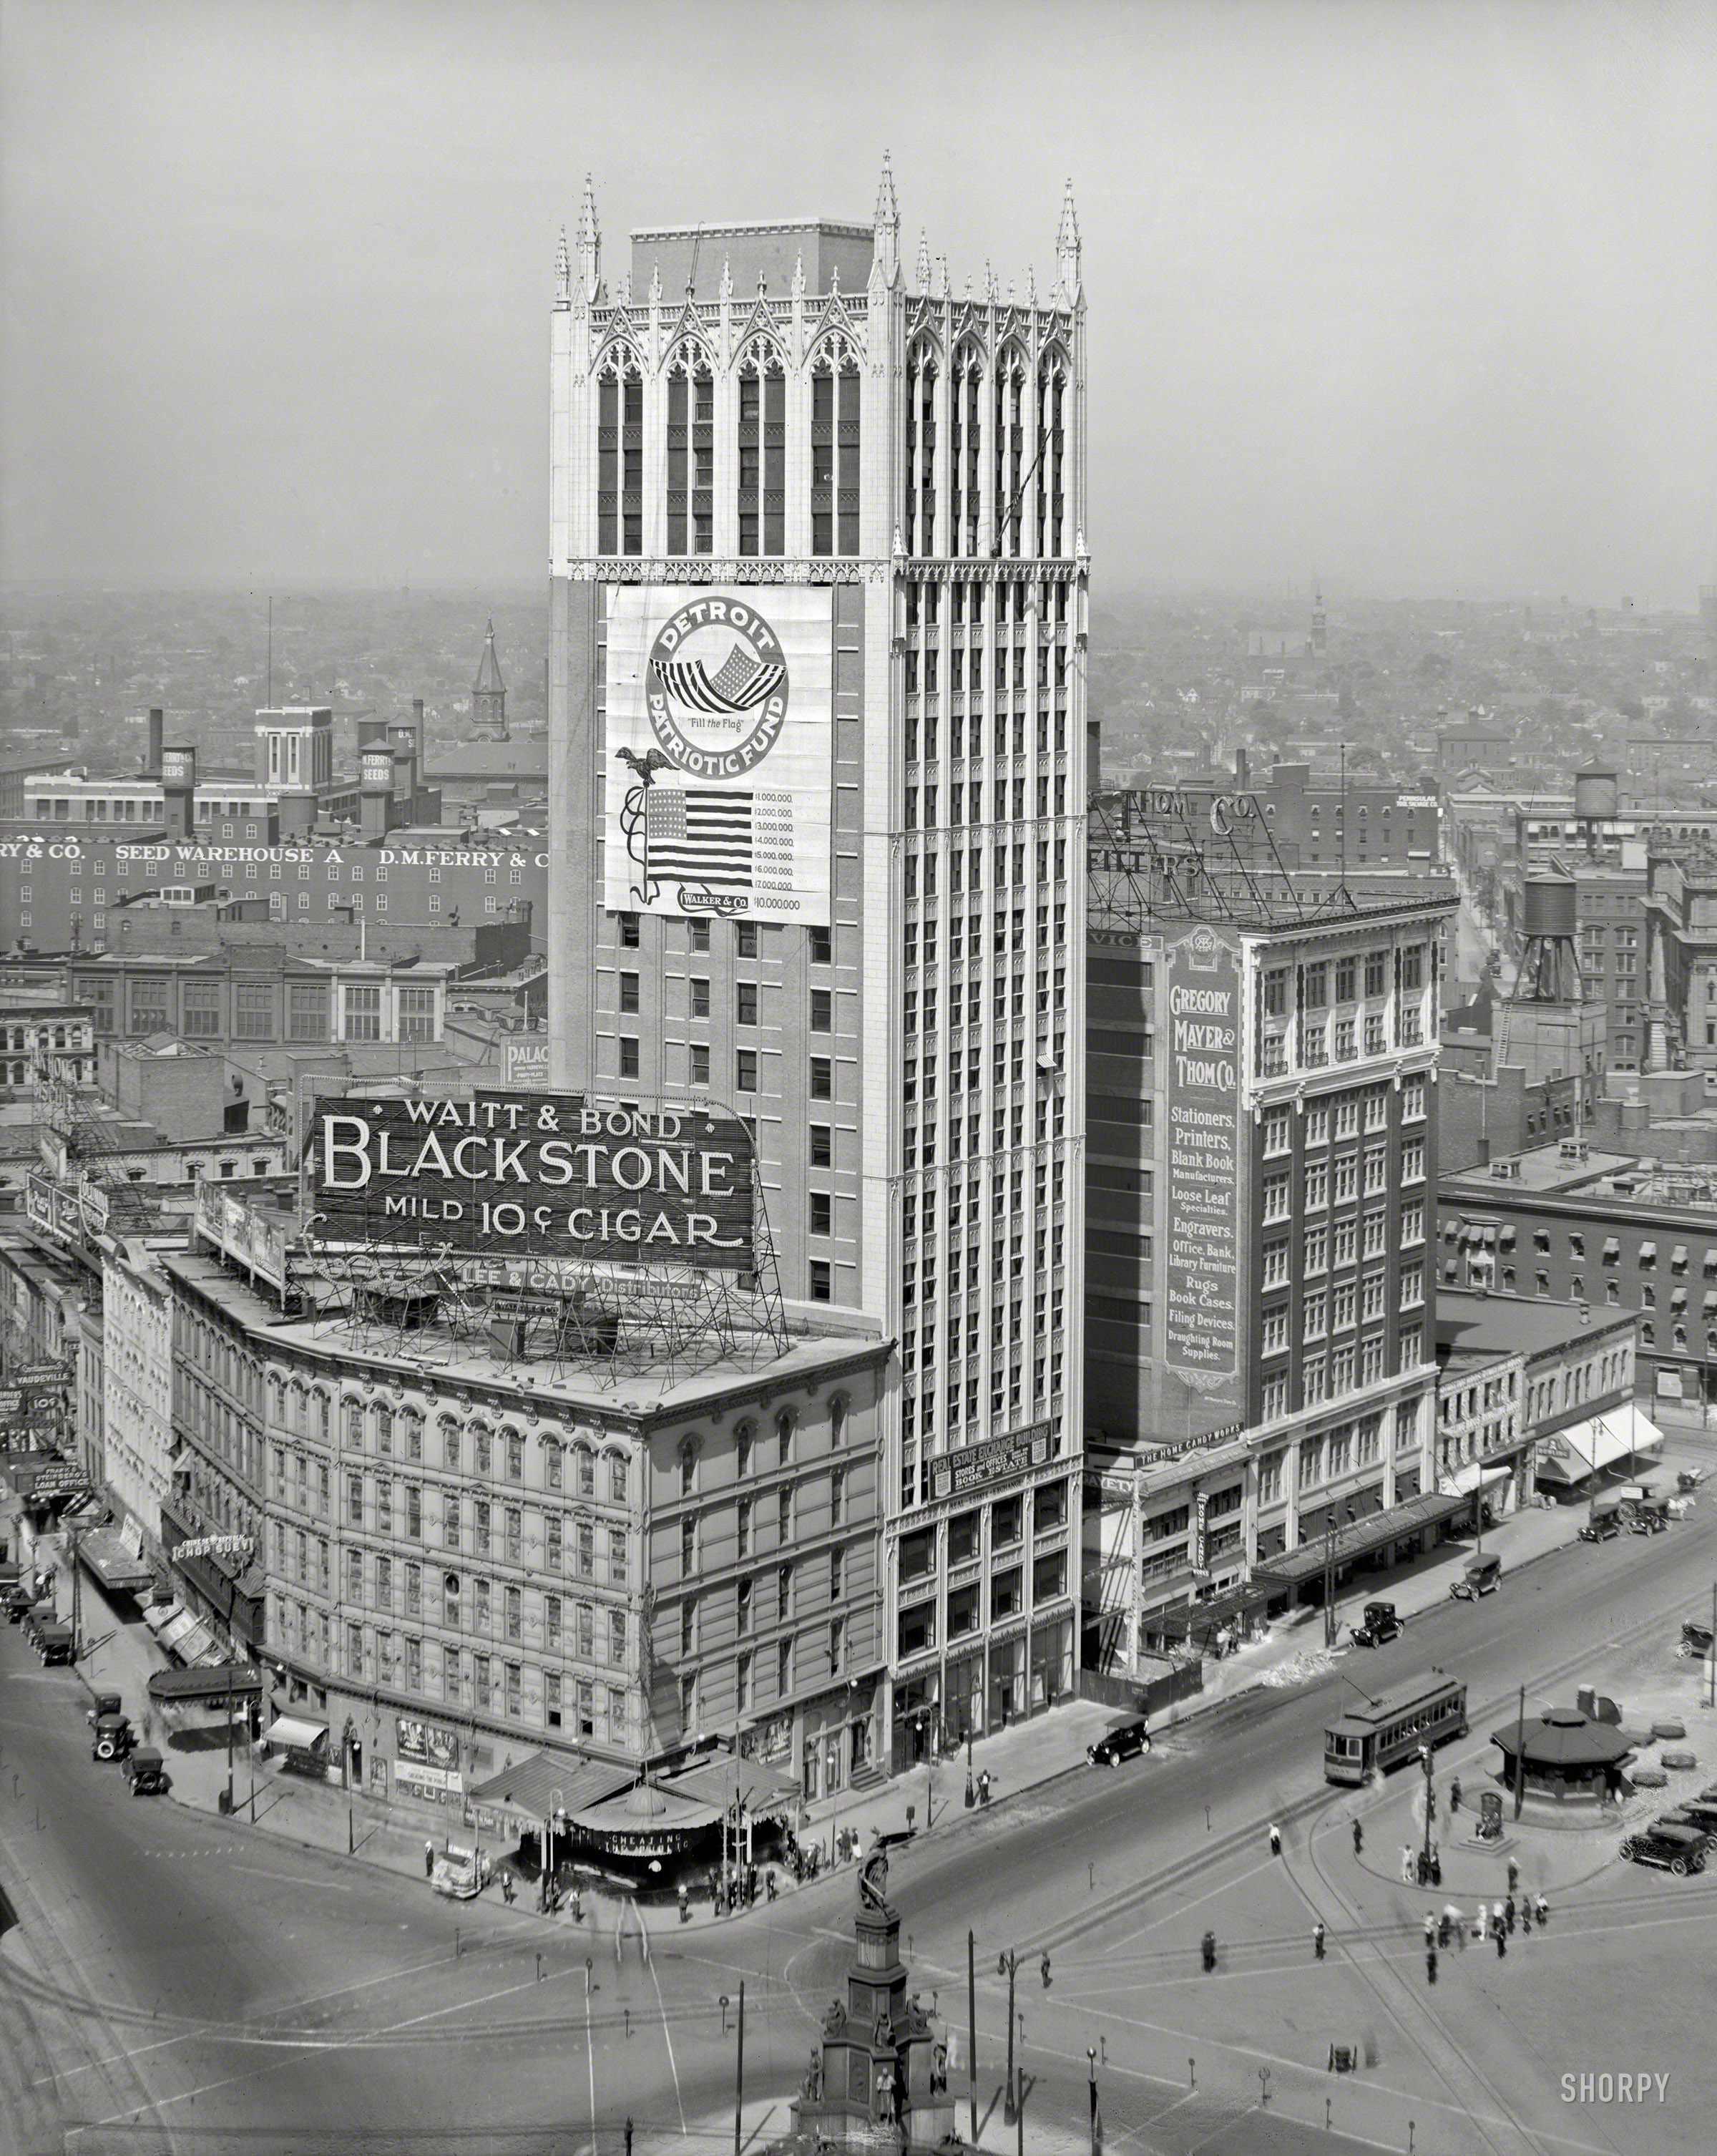 "Real Estate Exchange from Dime Bank building." An early Detroit skyscraper, known for most of its life as the Cadillac Square Building, around the time it was completed in 1918. 8x10 glass negative, Detroit Publishing Co. View full size.